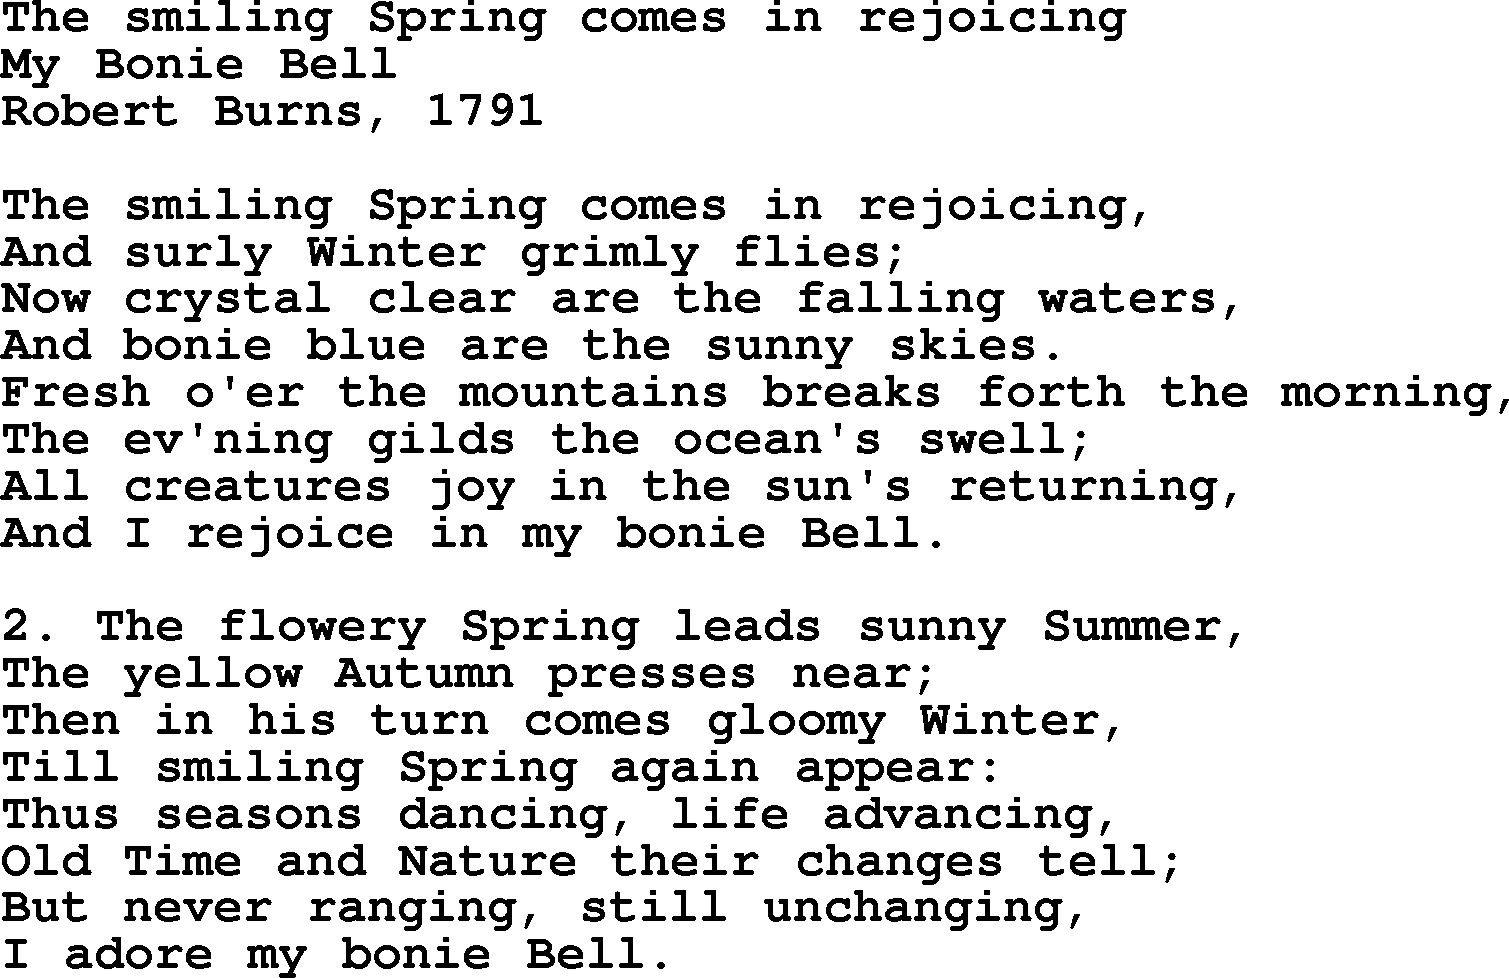 Robert Burns Songs & Lyrics: The Smiling Spring Comes In Rejoicing